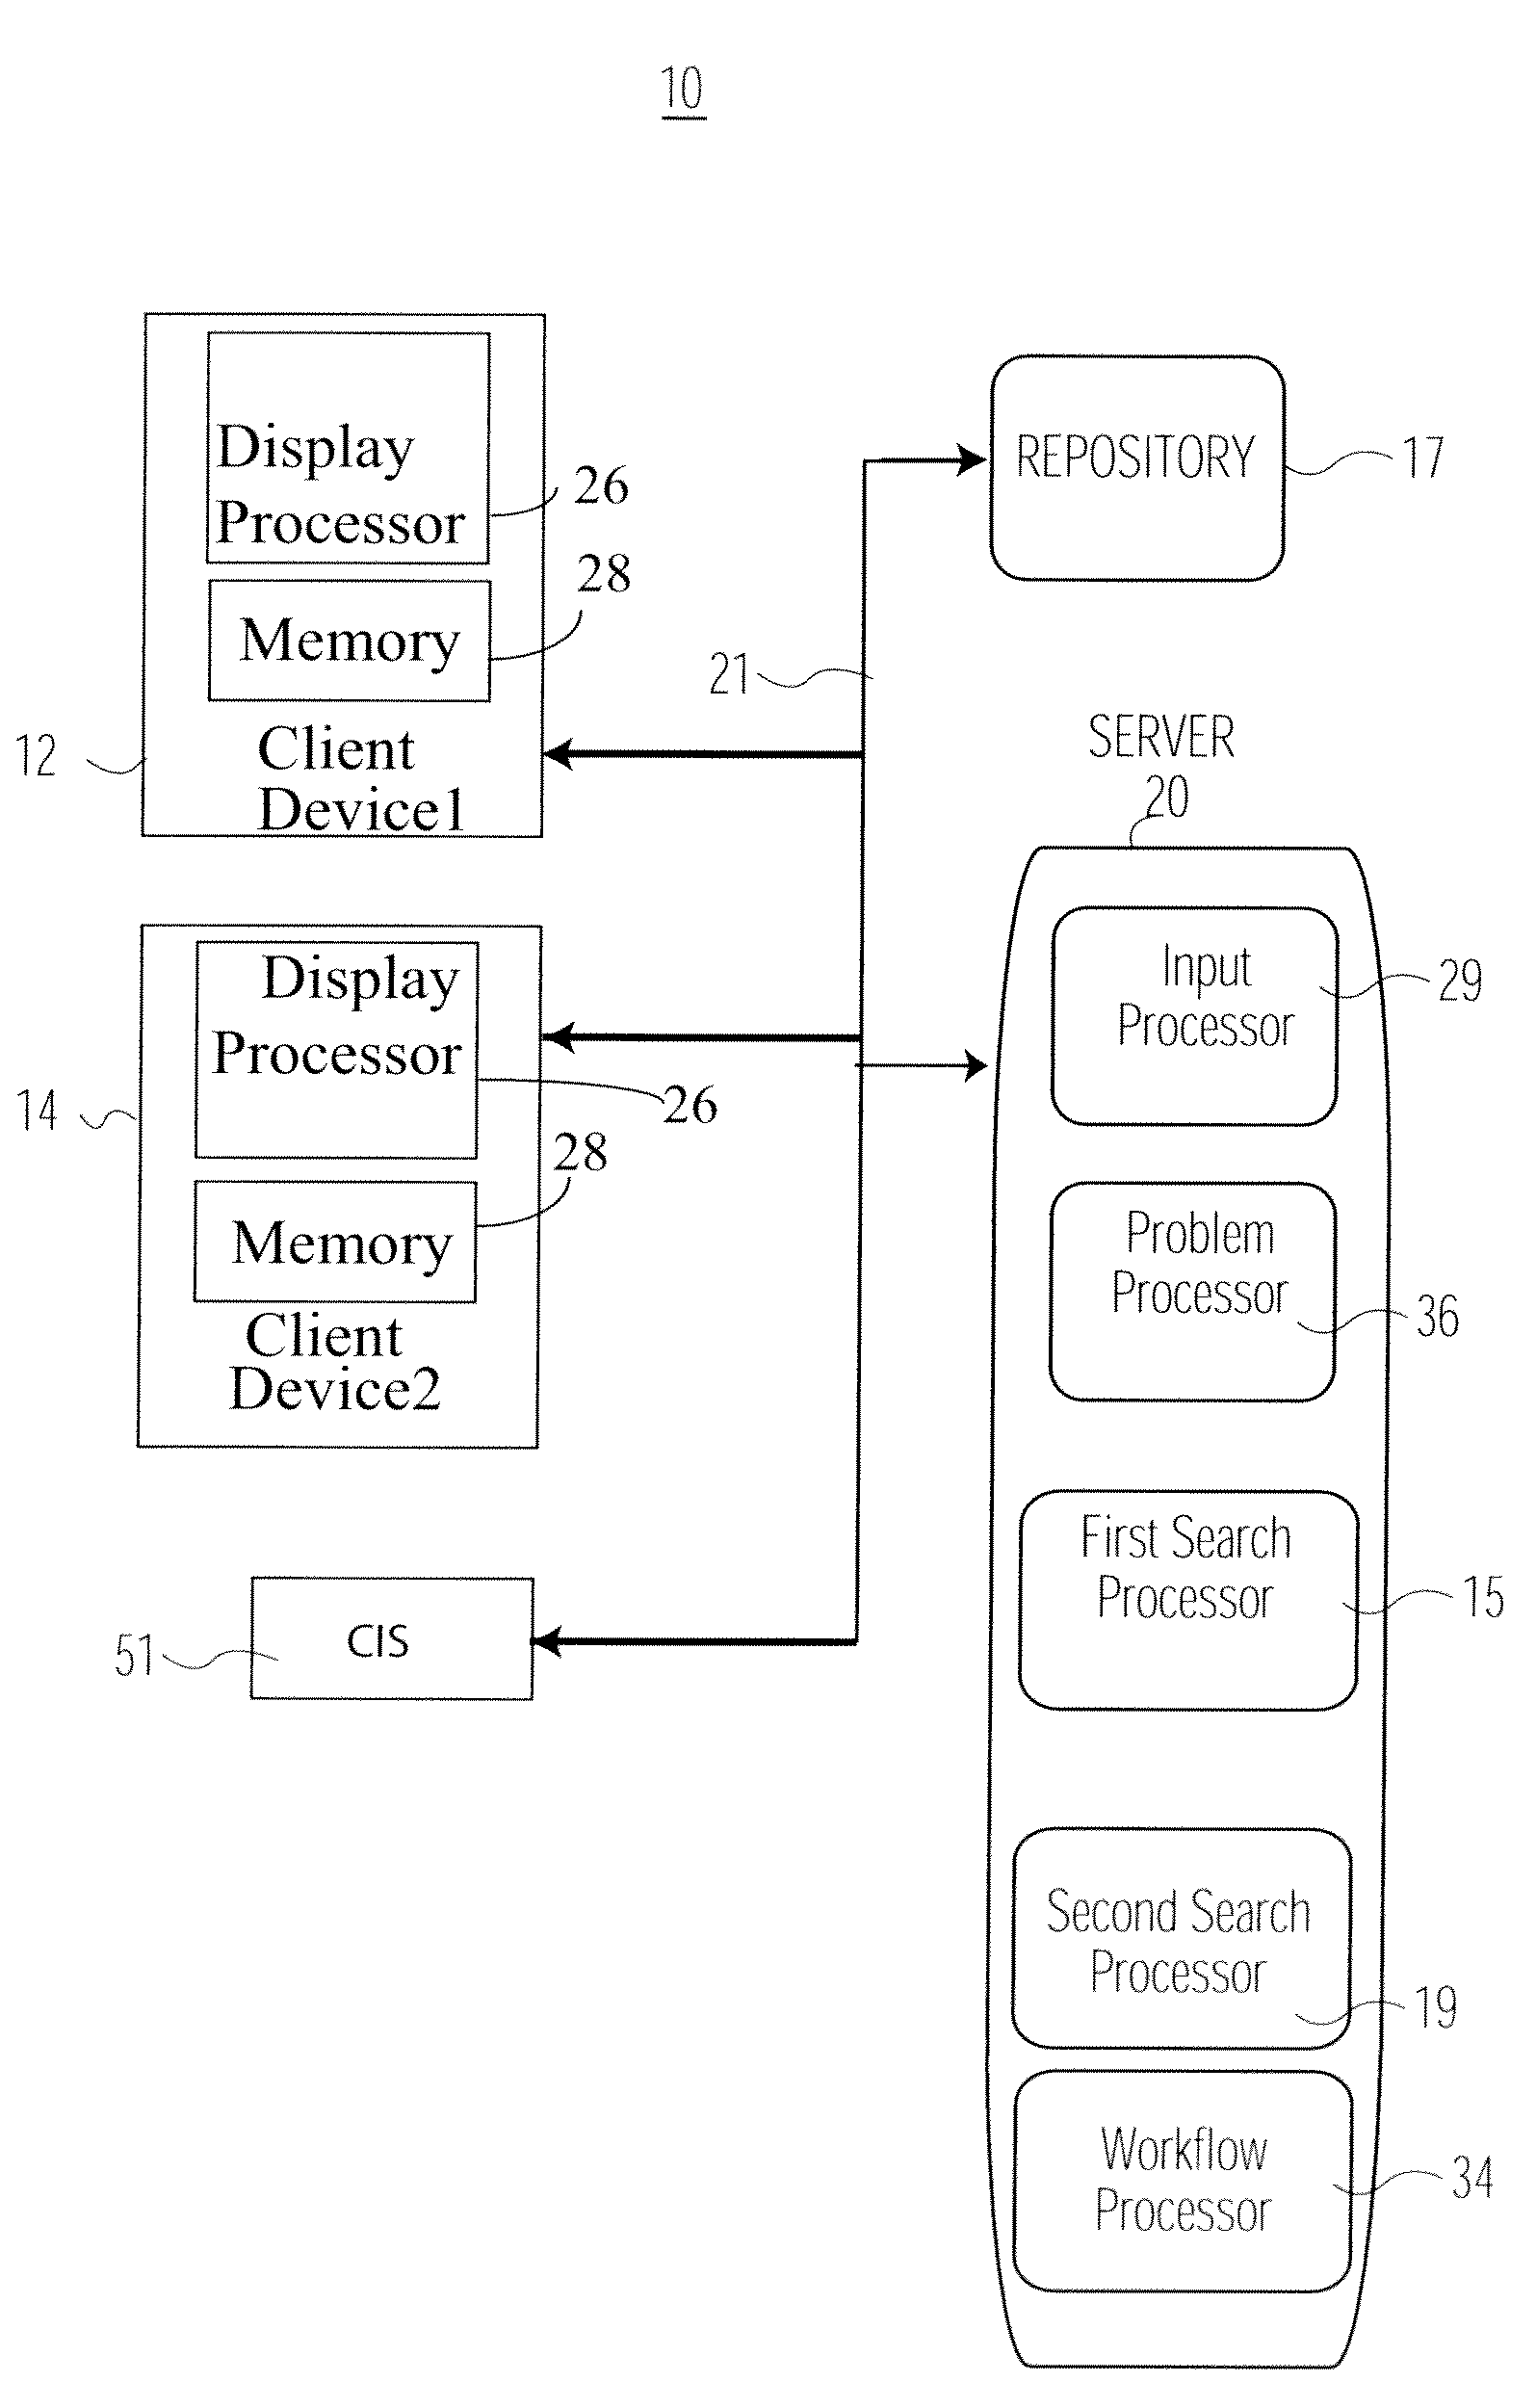 System for Providing Healthcare Operation Specific User Interface Display Images